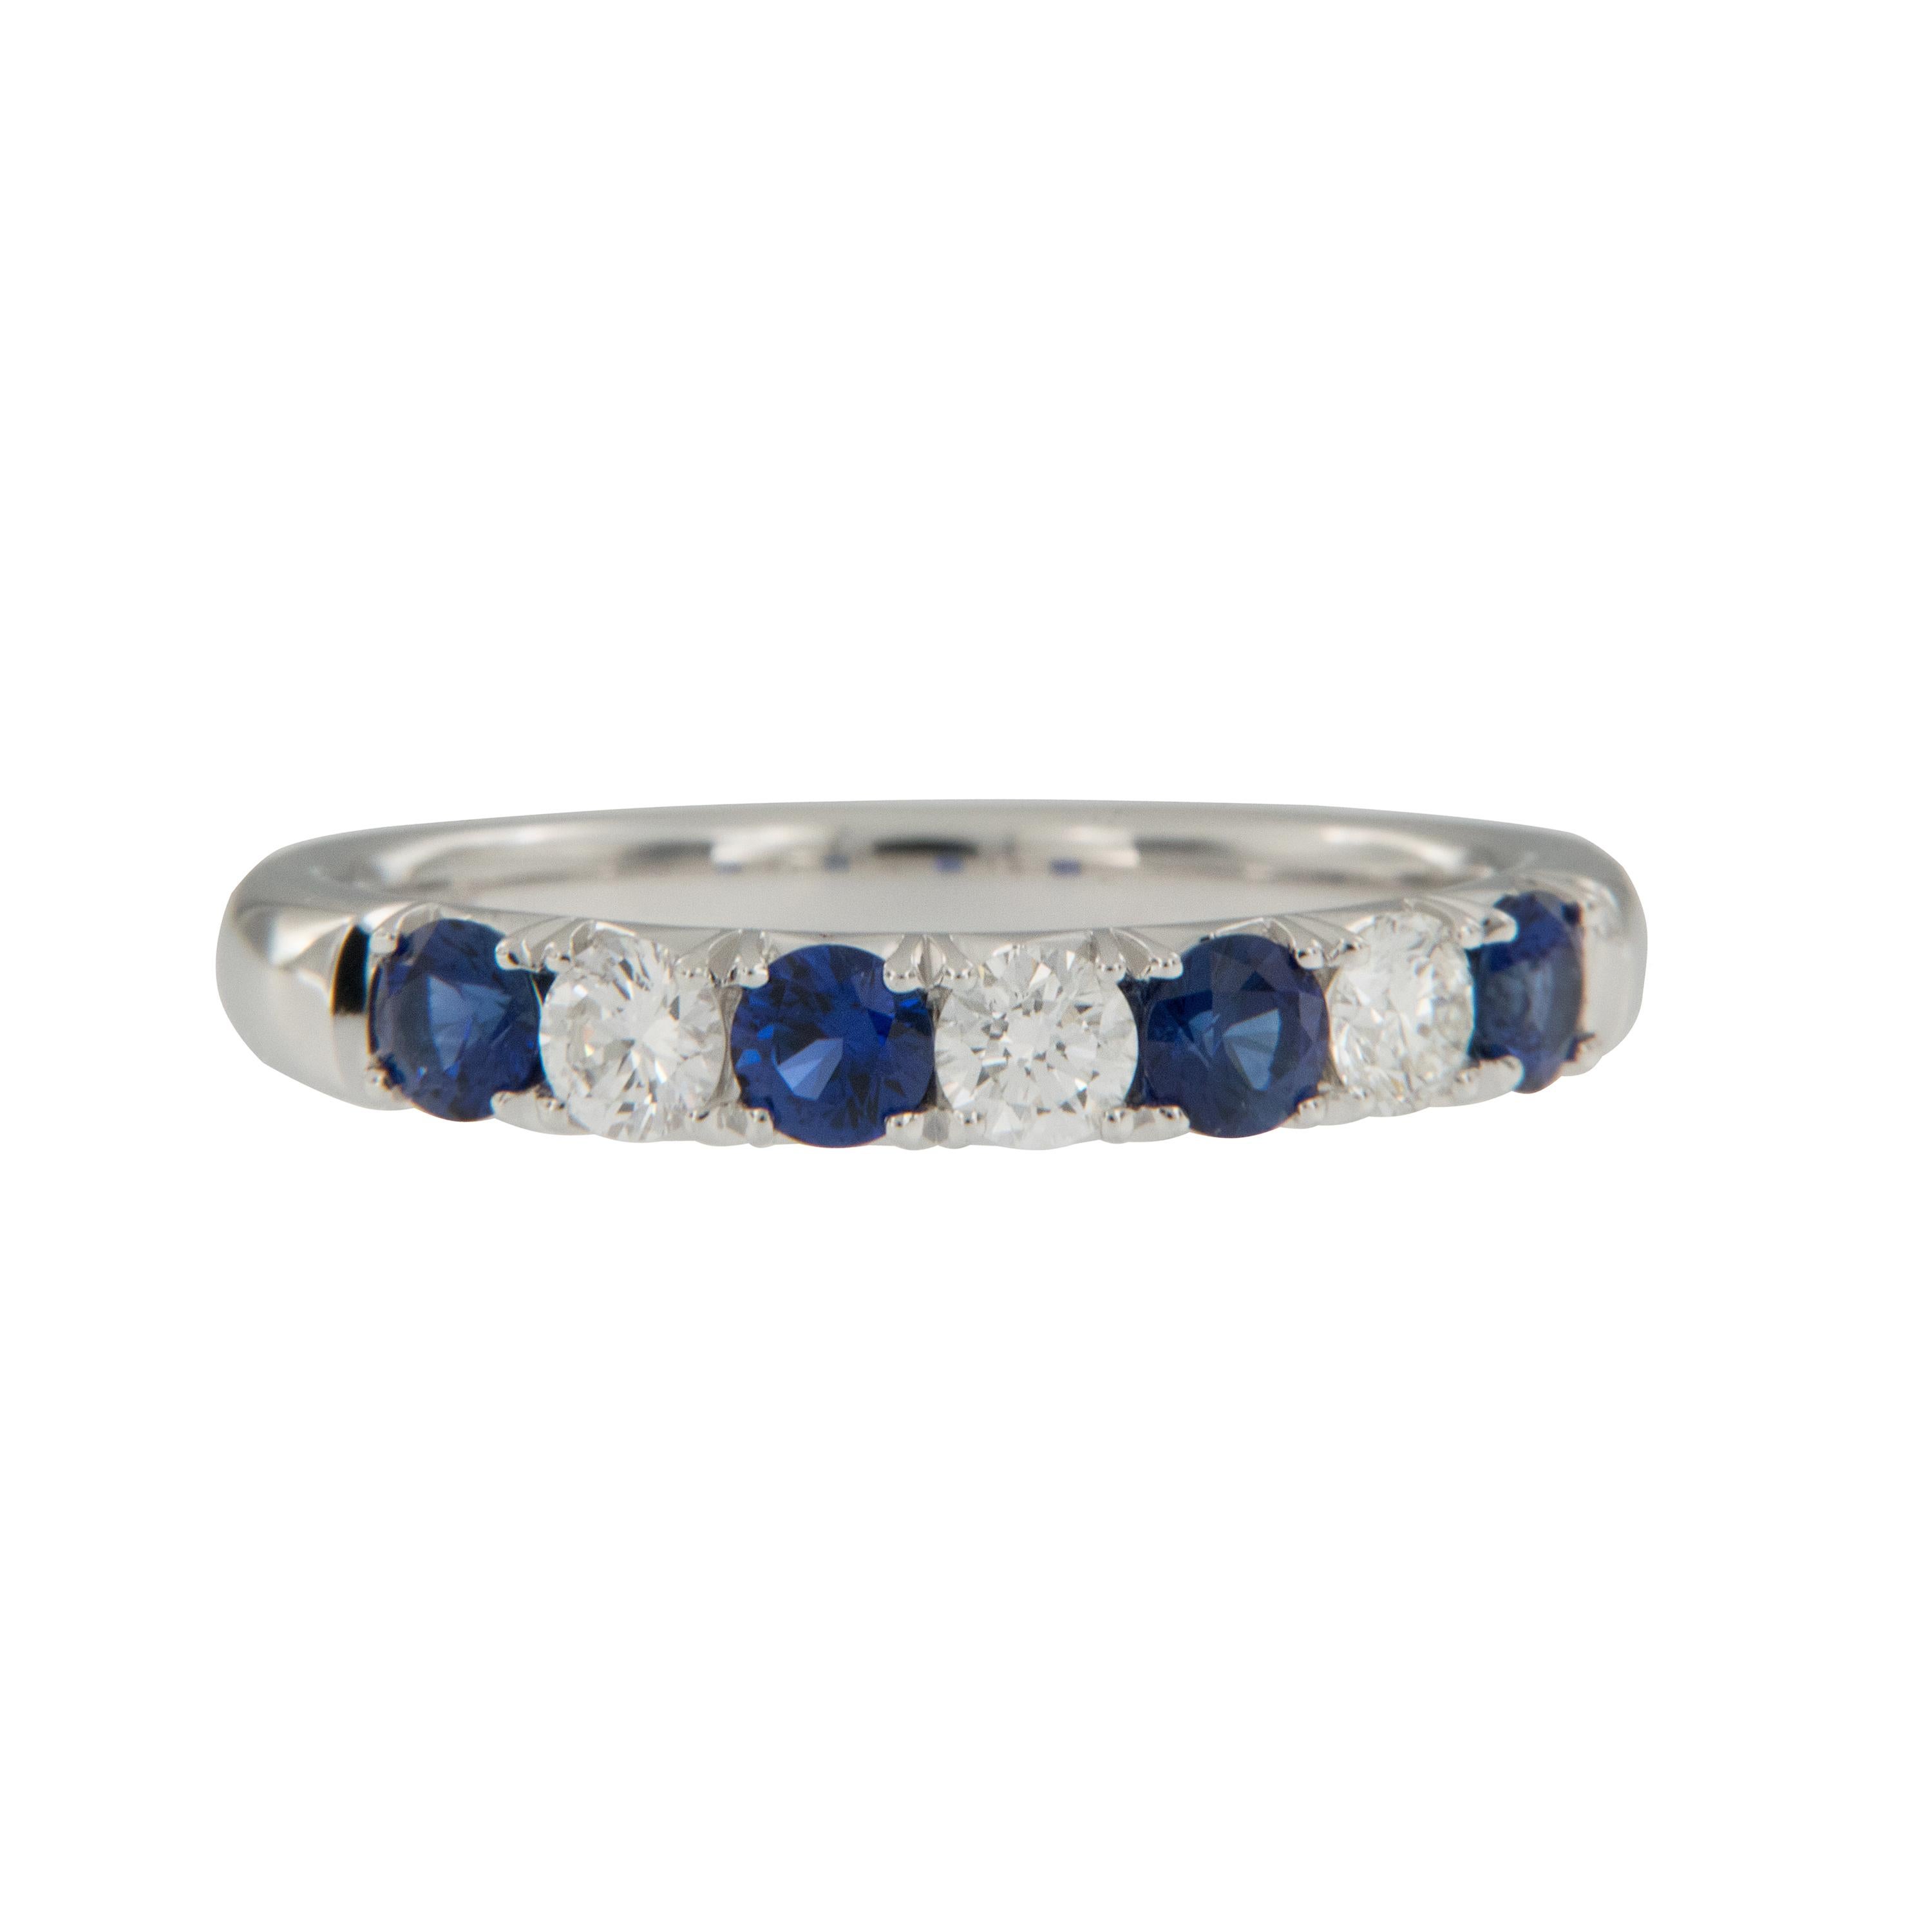 Spark is well known for making some of the most beautiful colored gemstone jewelry for the last 49 years. Crafted in fine 18 karat white gold with the liveliest, saturated blue sapphires & beautiful white diamonds, this ring looks fantastic alone or